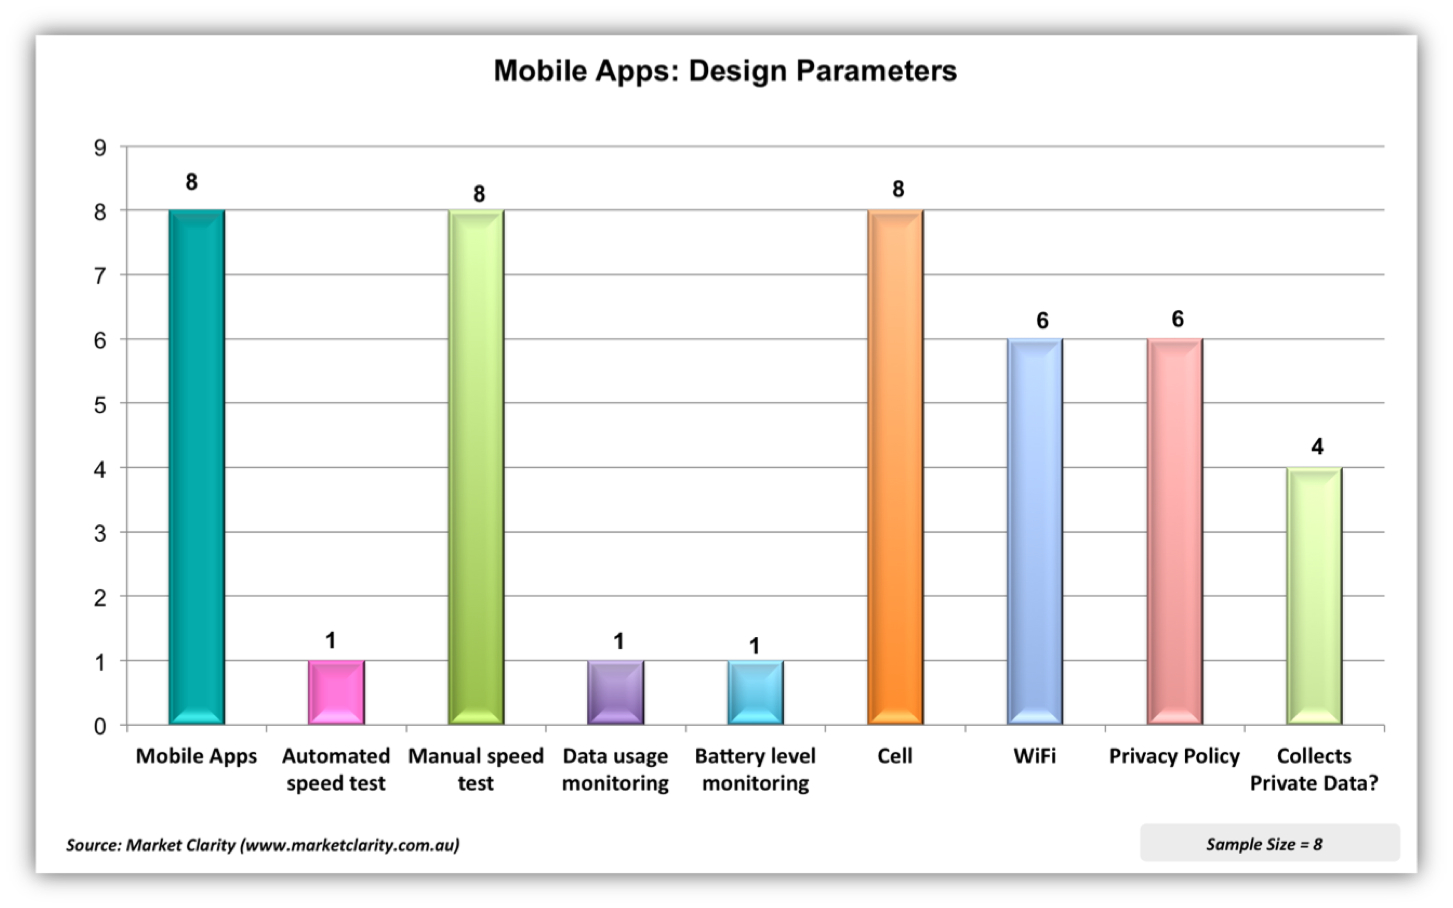 Fig. t Examining Design Parameters used by Mobile Apps